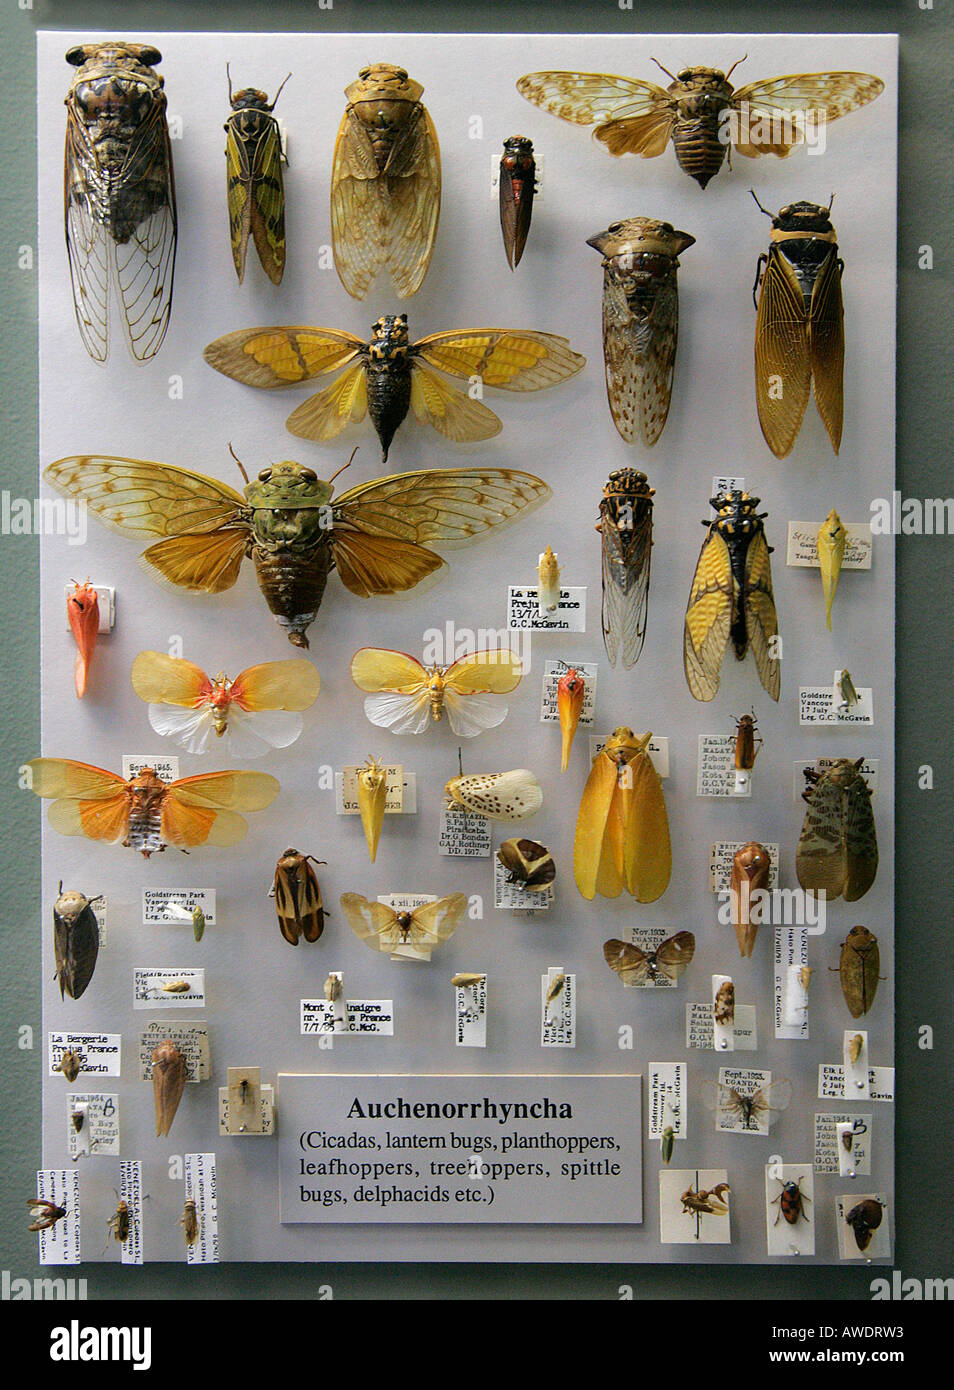 Auchenorrhyncha Cicadas Lantem bugs planthoppers leafhoppers treehoppers spittle bugs delphacids Beetle cockchafer museum Stock Photo